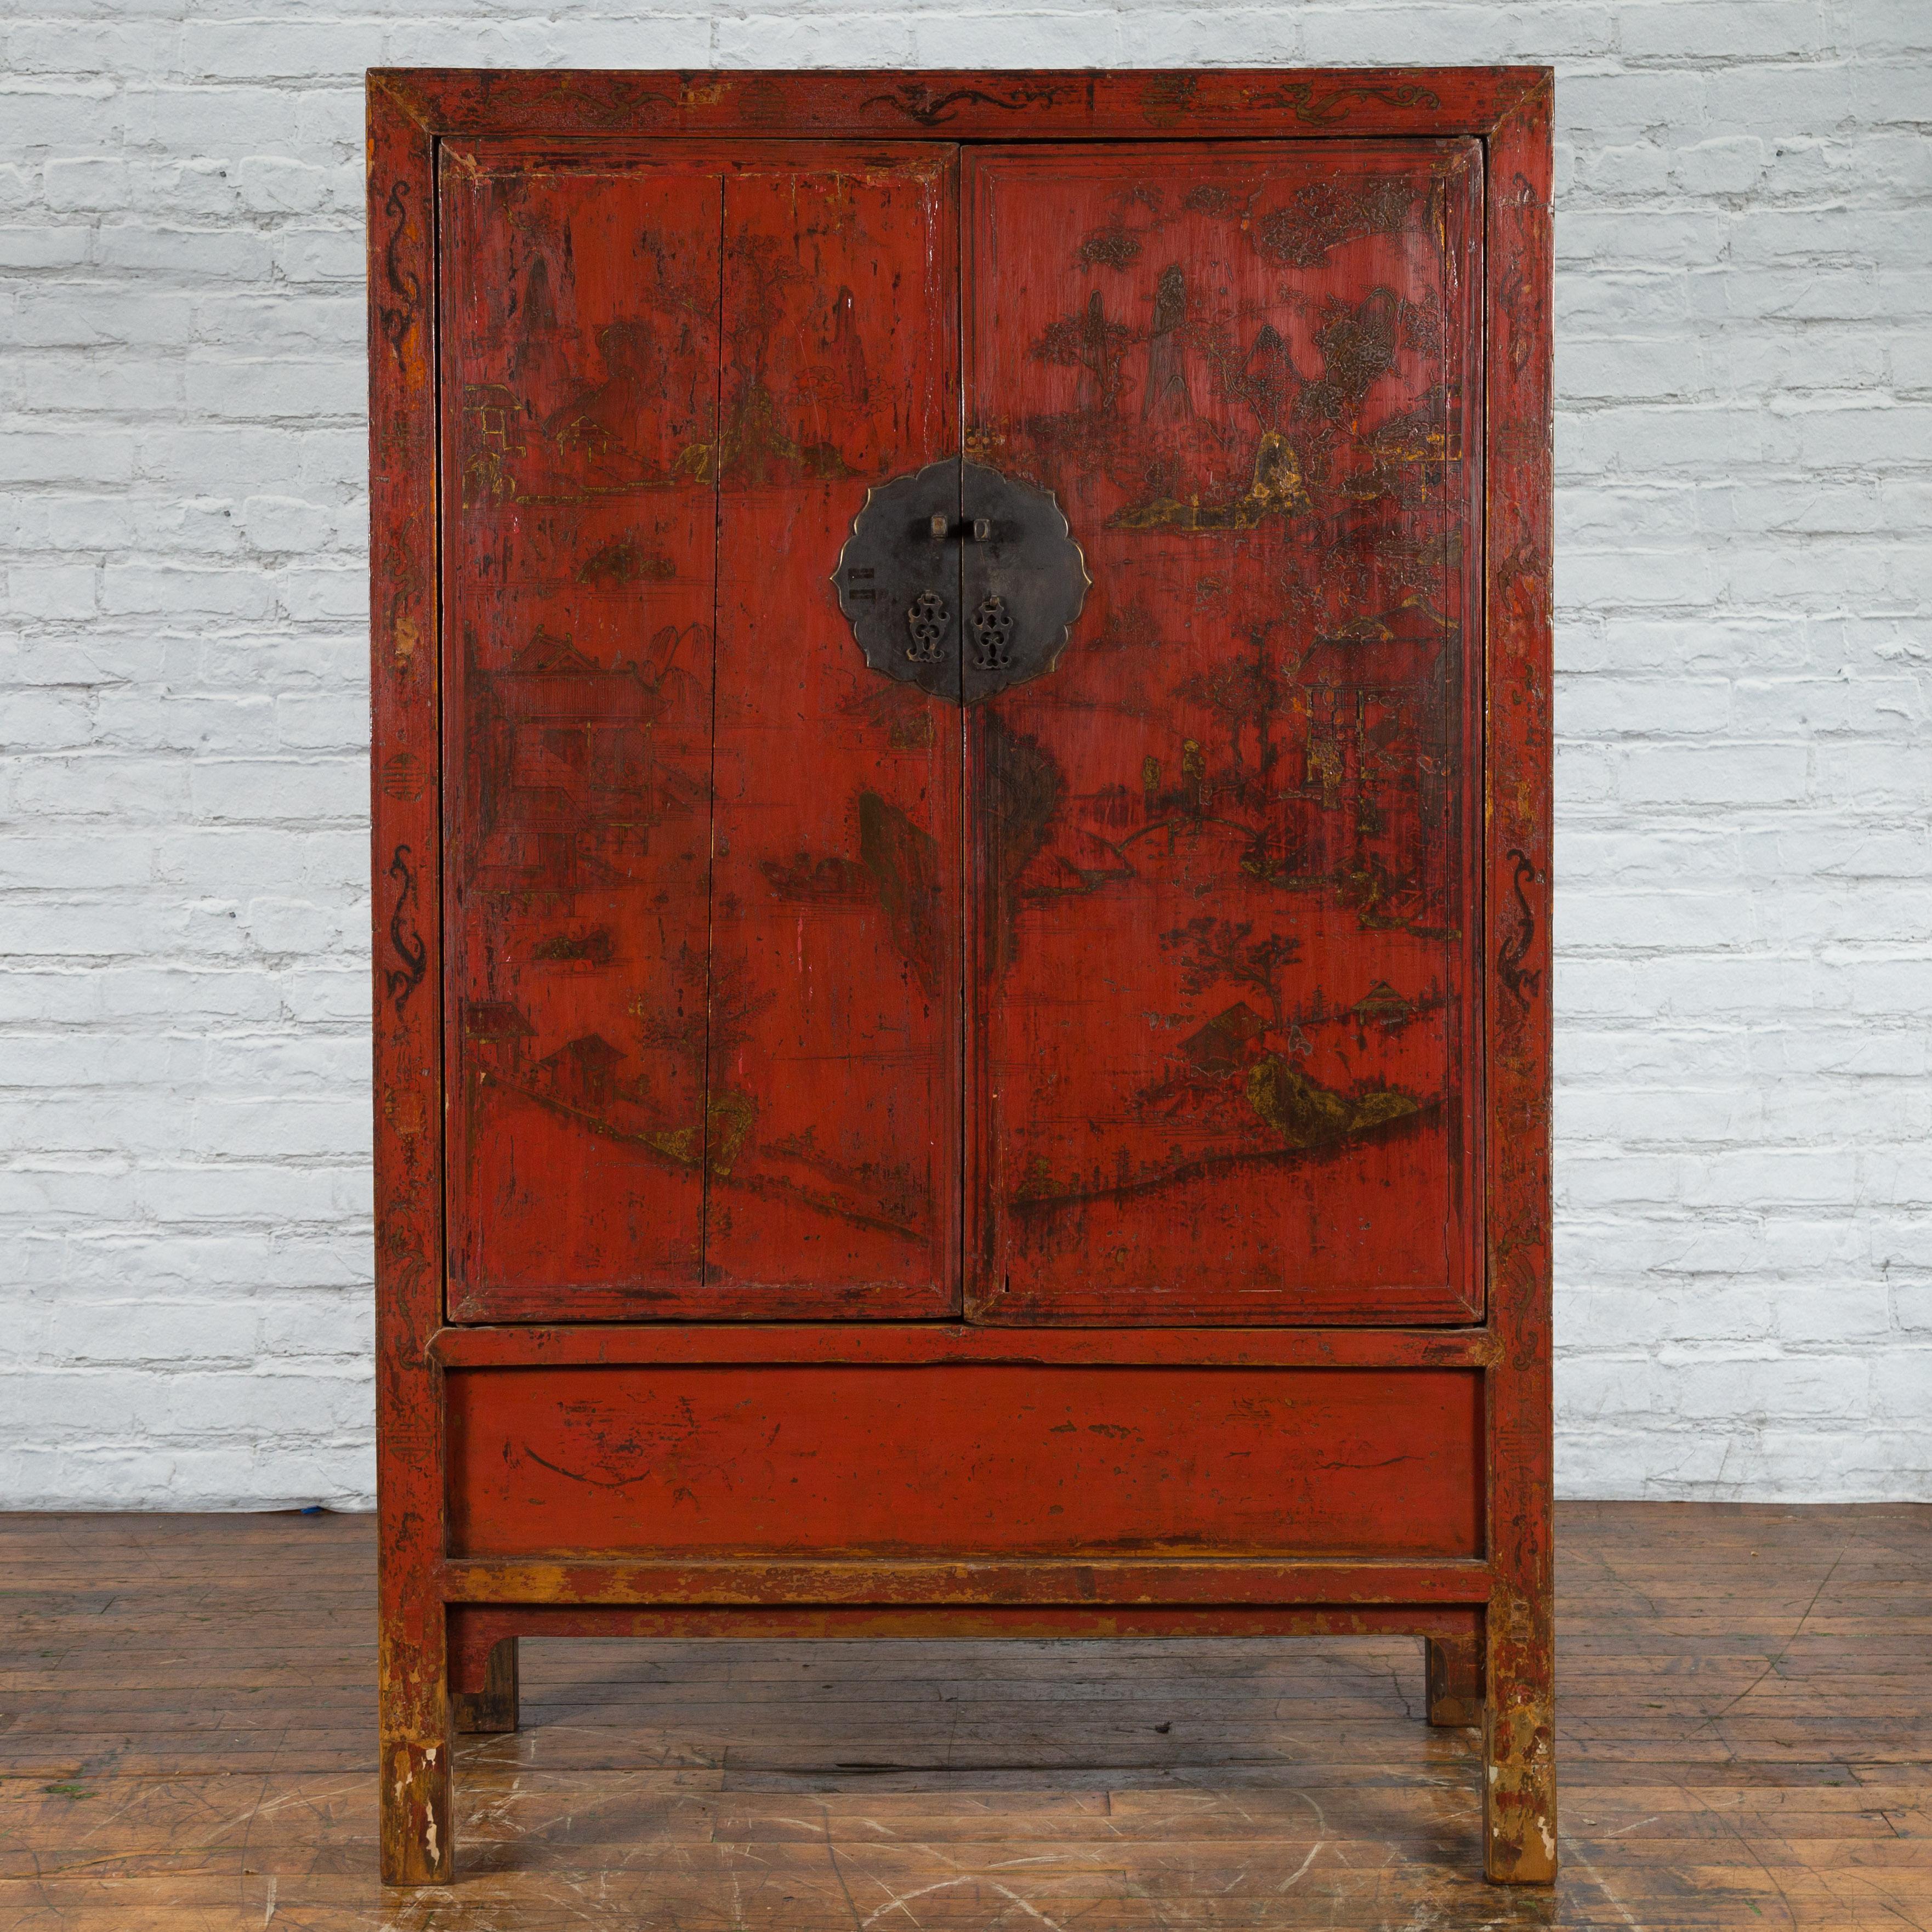 A Chinese Qing Dynasty period red lacquer cabinet from the 19th century, with hand-painted gilt motifs. Created in China during the Qing Dynasty in the 19th century, this wooden cabinet features a linear silhouette perfectly complimented by a red